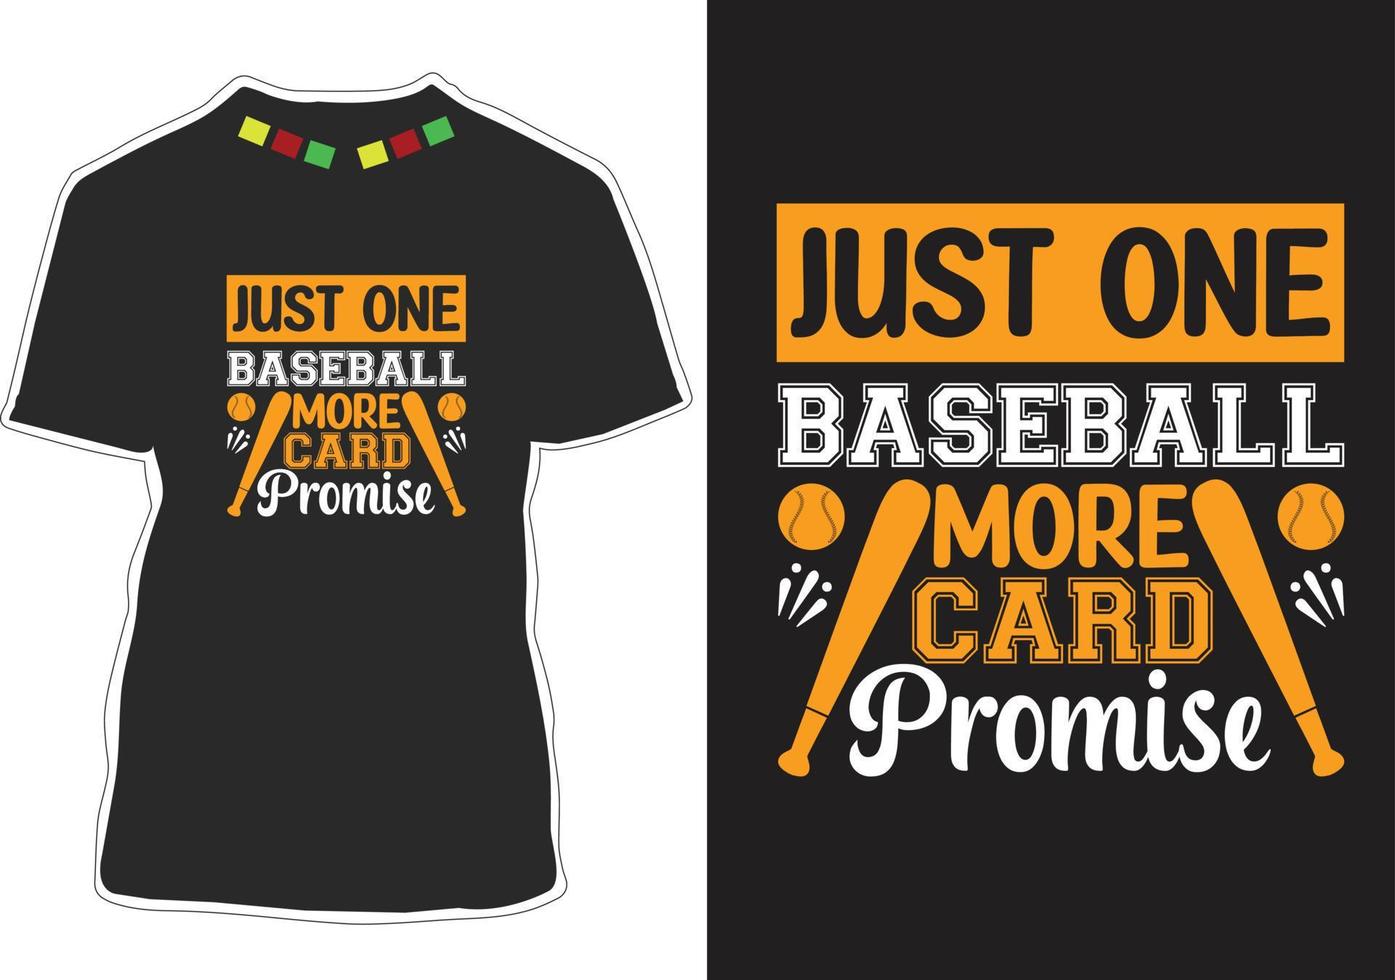 Just One Baseball More Card Promise T-shirt Design vector